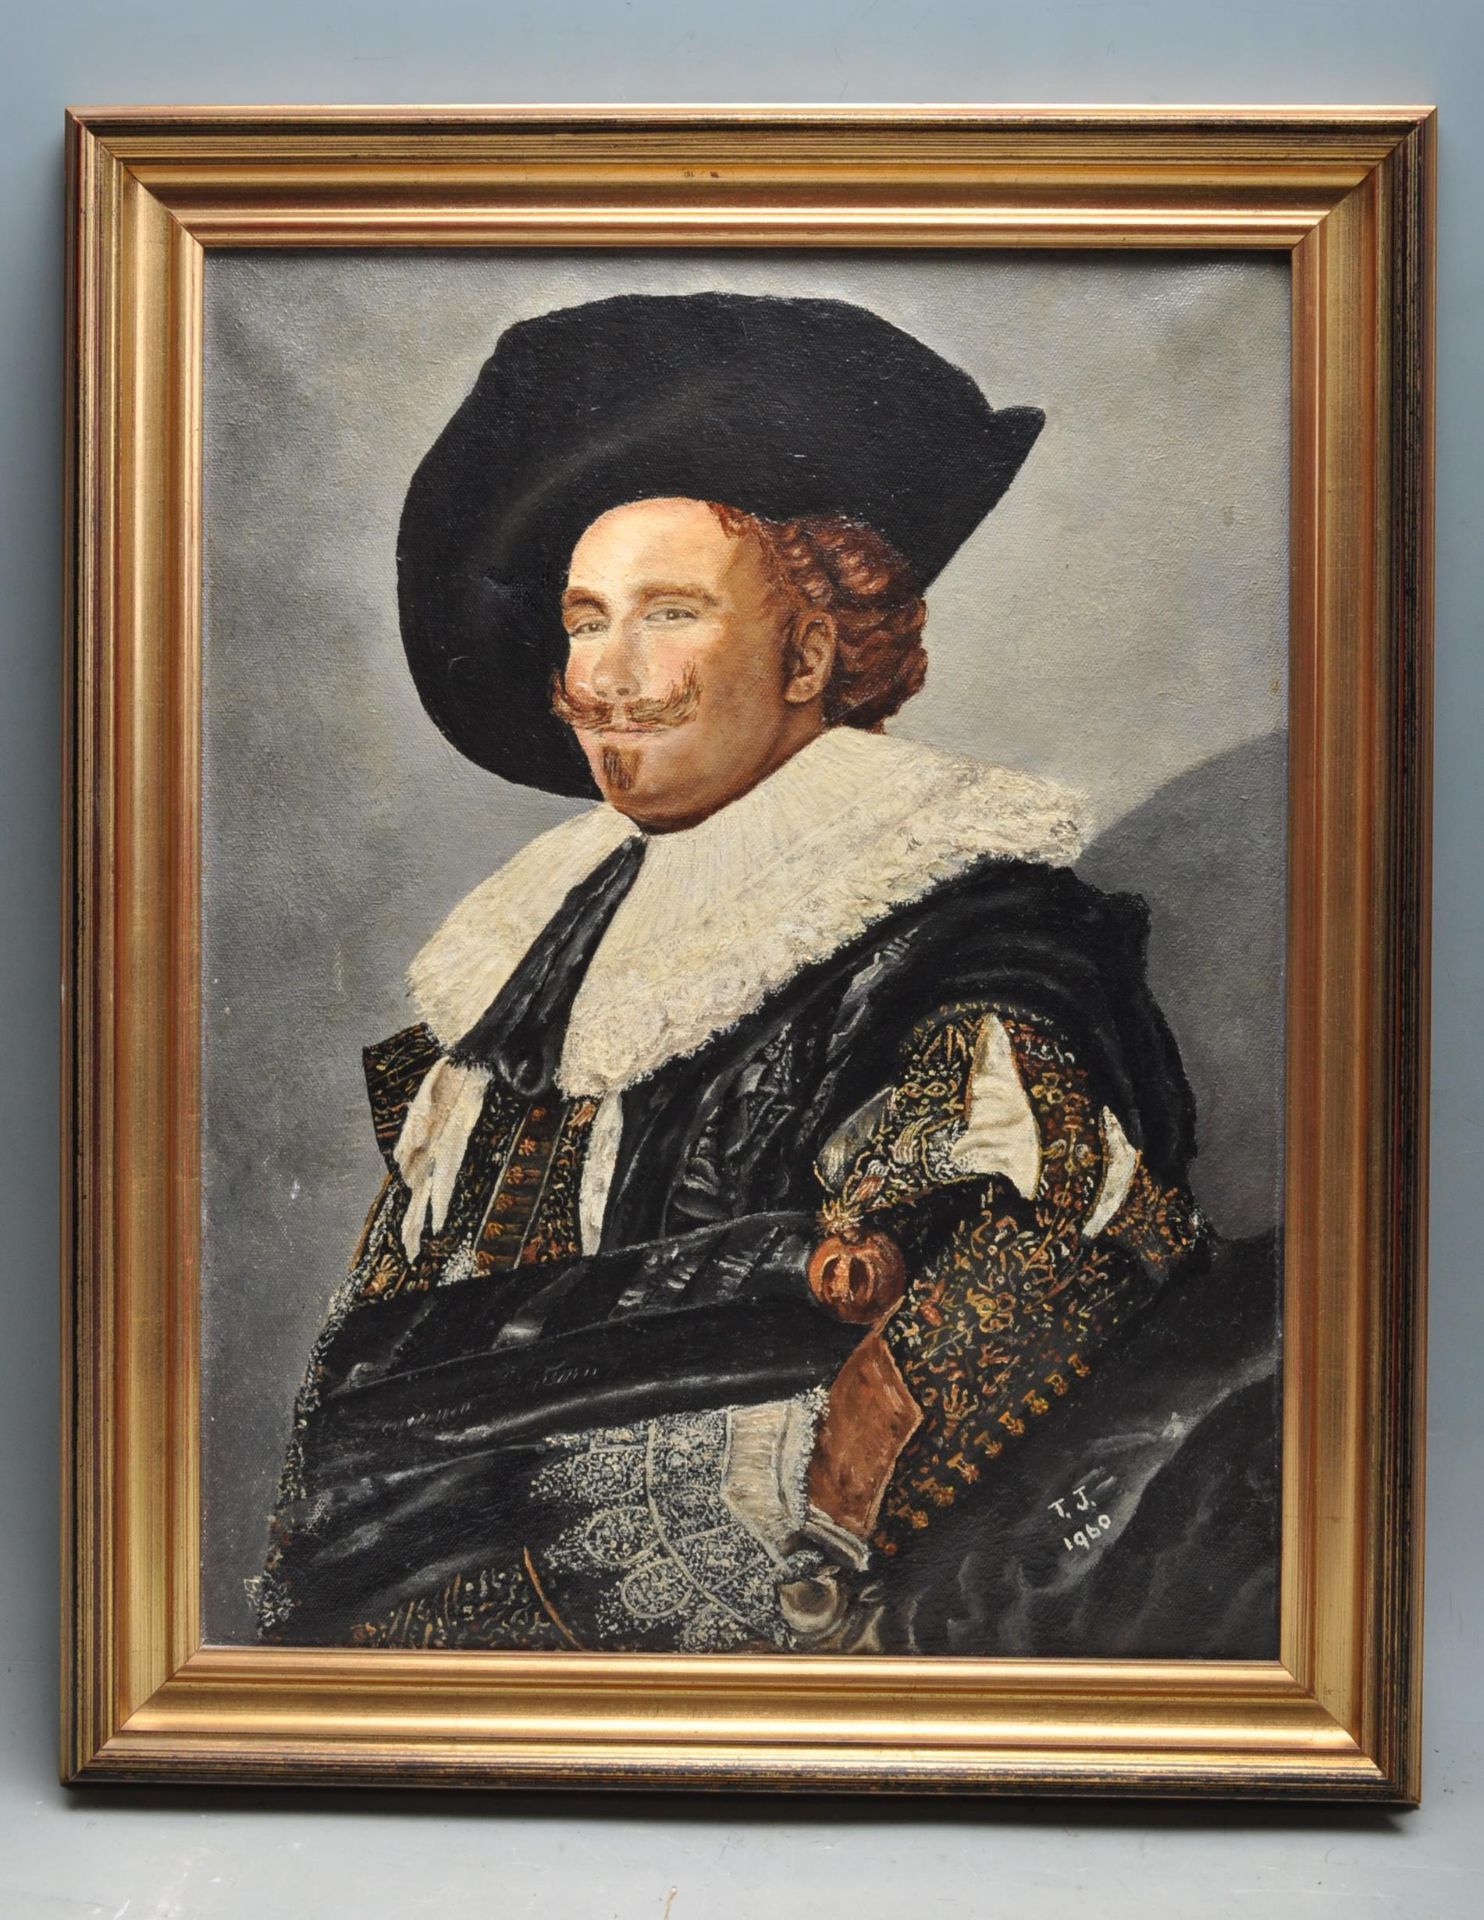 THE LAUGHING CAVALIER AFTER FRANS HALS OIL ON CANVAS PAINTING